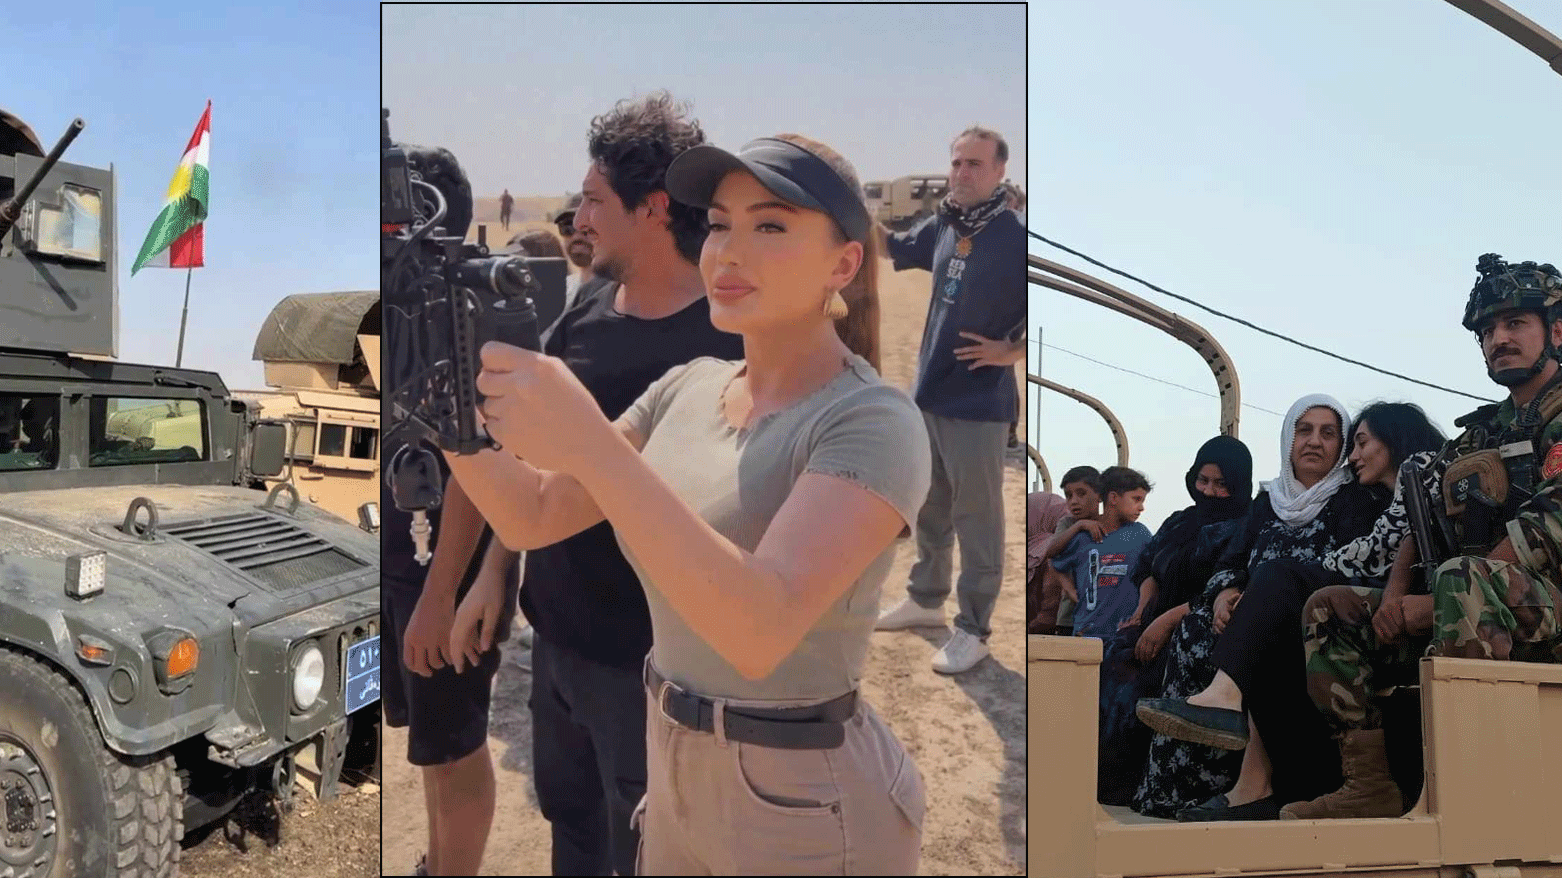 Helly Luv (center) working with filming equipment on the set. (Photo: Submitted to Kurdistan 24)